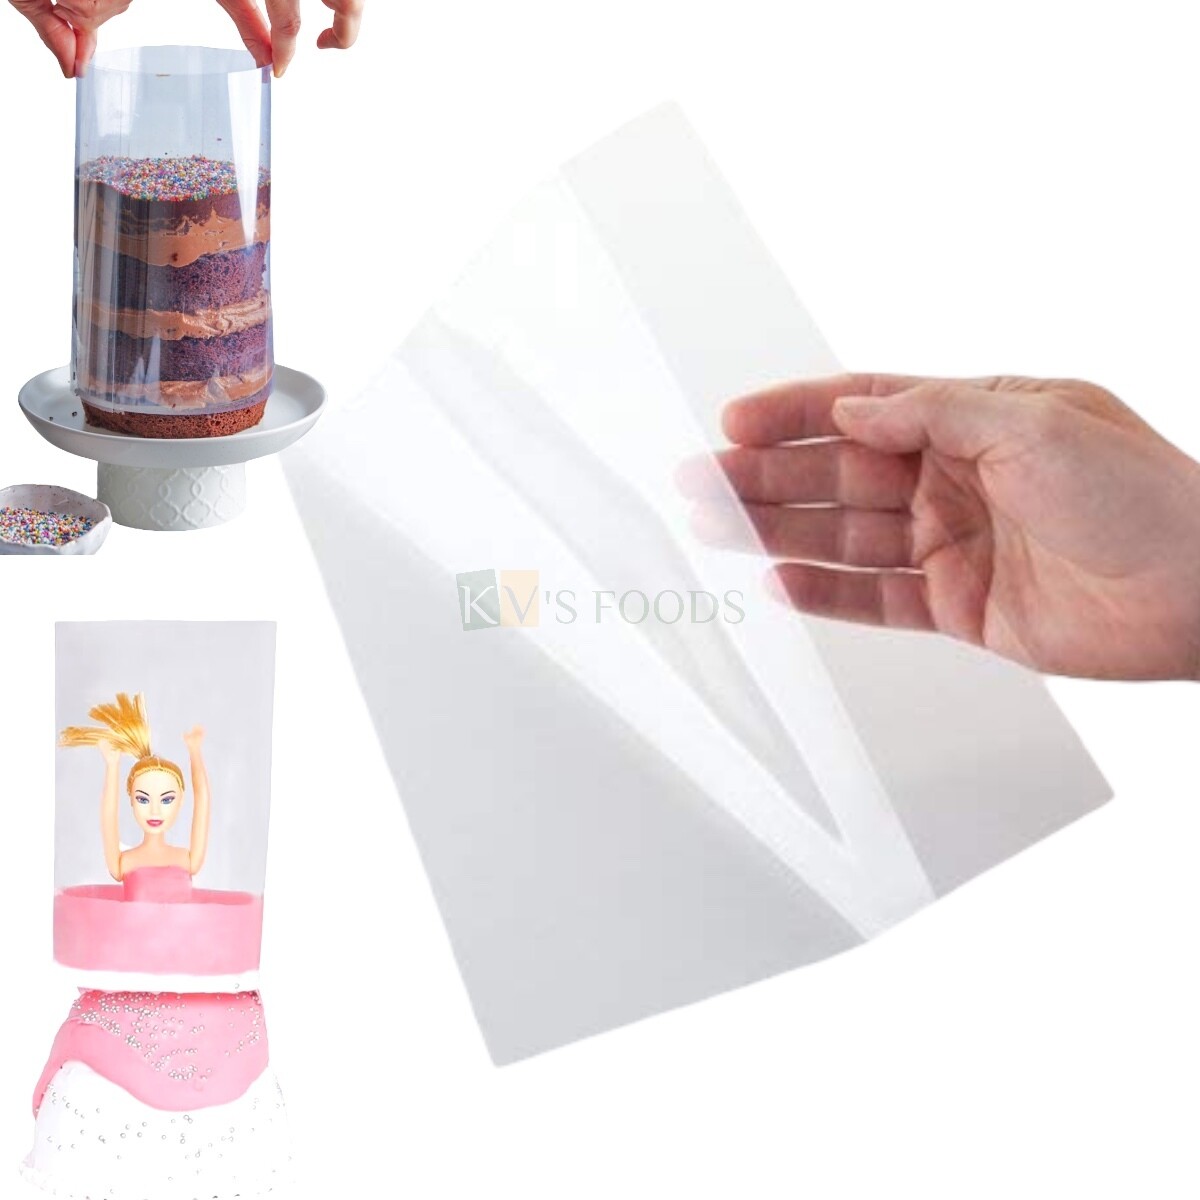 1PC Large (20Inch X 13Inch) Transparent OHP Clear Film Sheet for Pull Me Up Cakes, Chocolate Garnishing Decorations Acetate Sheet, Chocolate Net Lace Cakes Decoration Acetate Sheet.